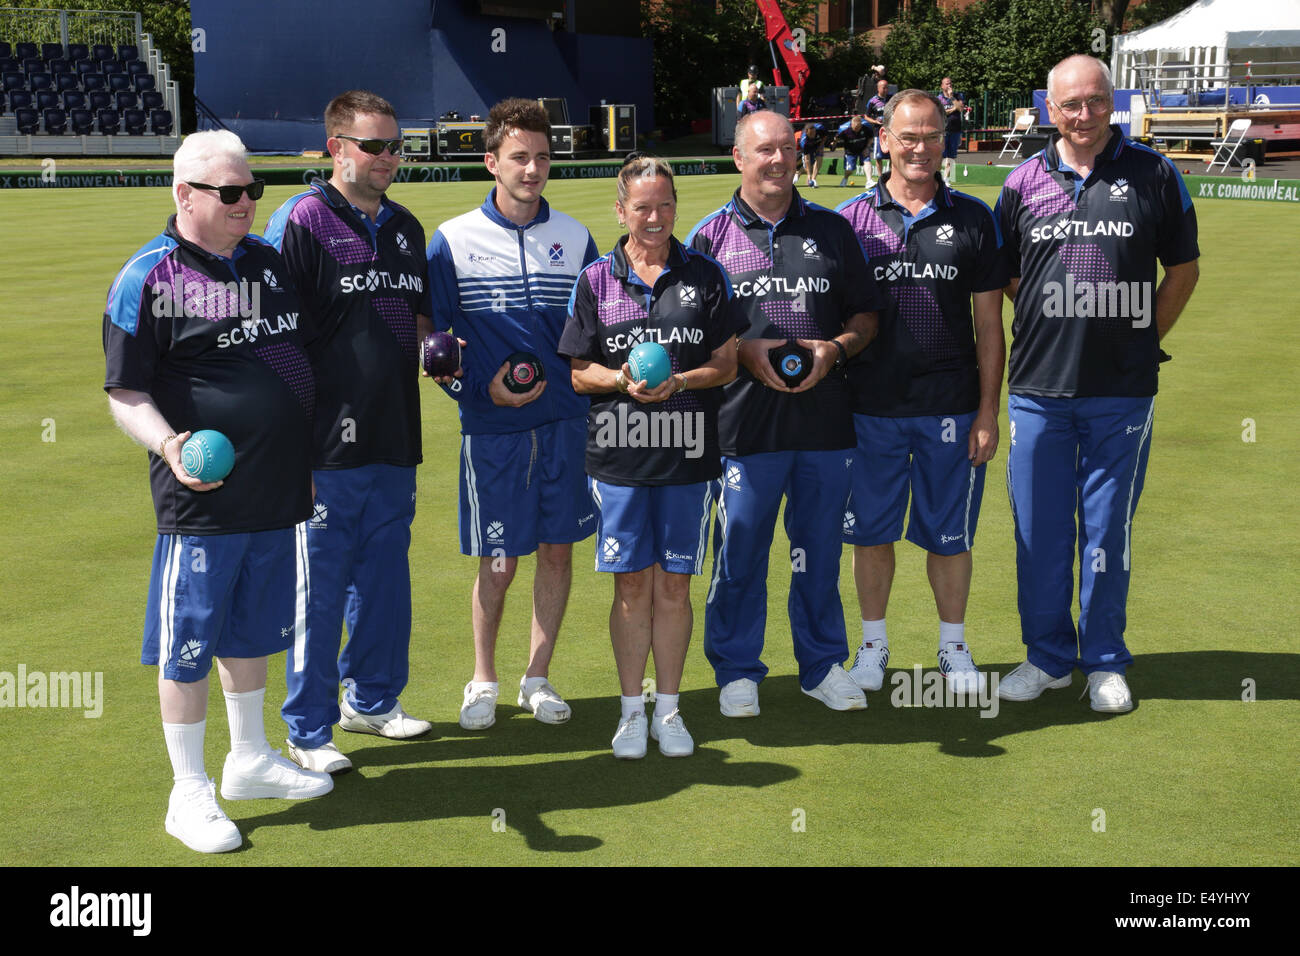 Kelvingrove Lawn Bowls Centre, Glasgow, Scotland, UK, Thursday, 17th July, 2014. Team Scotland Para-Sport Lawn Bowls Team in the venue for the 2014 Commonwealth Games Lawn Bowls Competition, left to right, Robert Conway, Michael Simpson, Kevin Wallace, Irene Edgar, Billy Allan, David Thomas and Ron McArthur Stock Photo